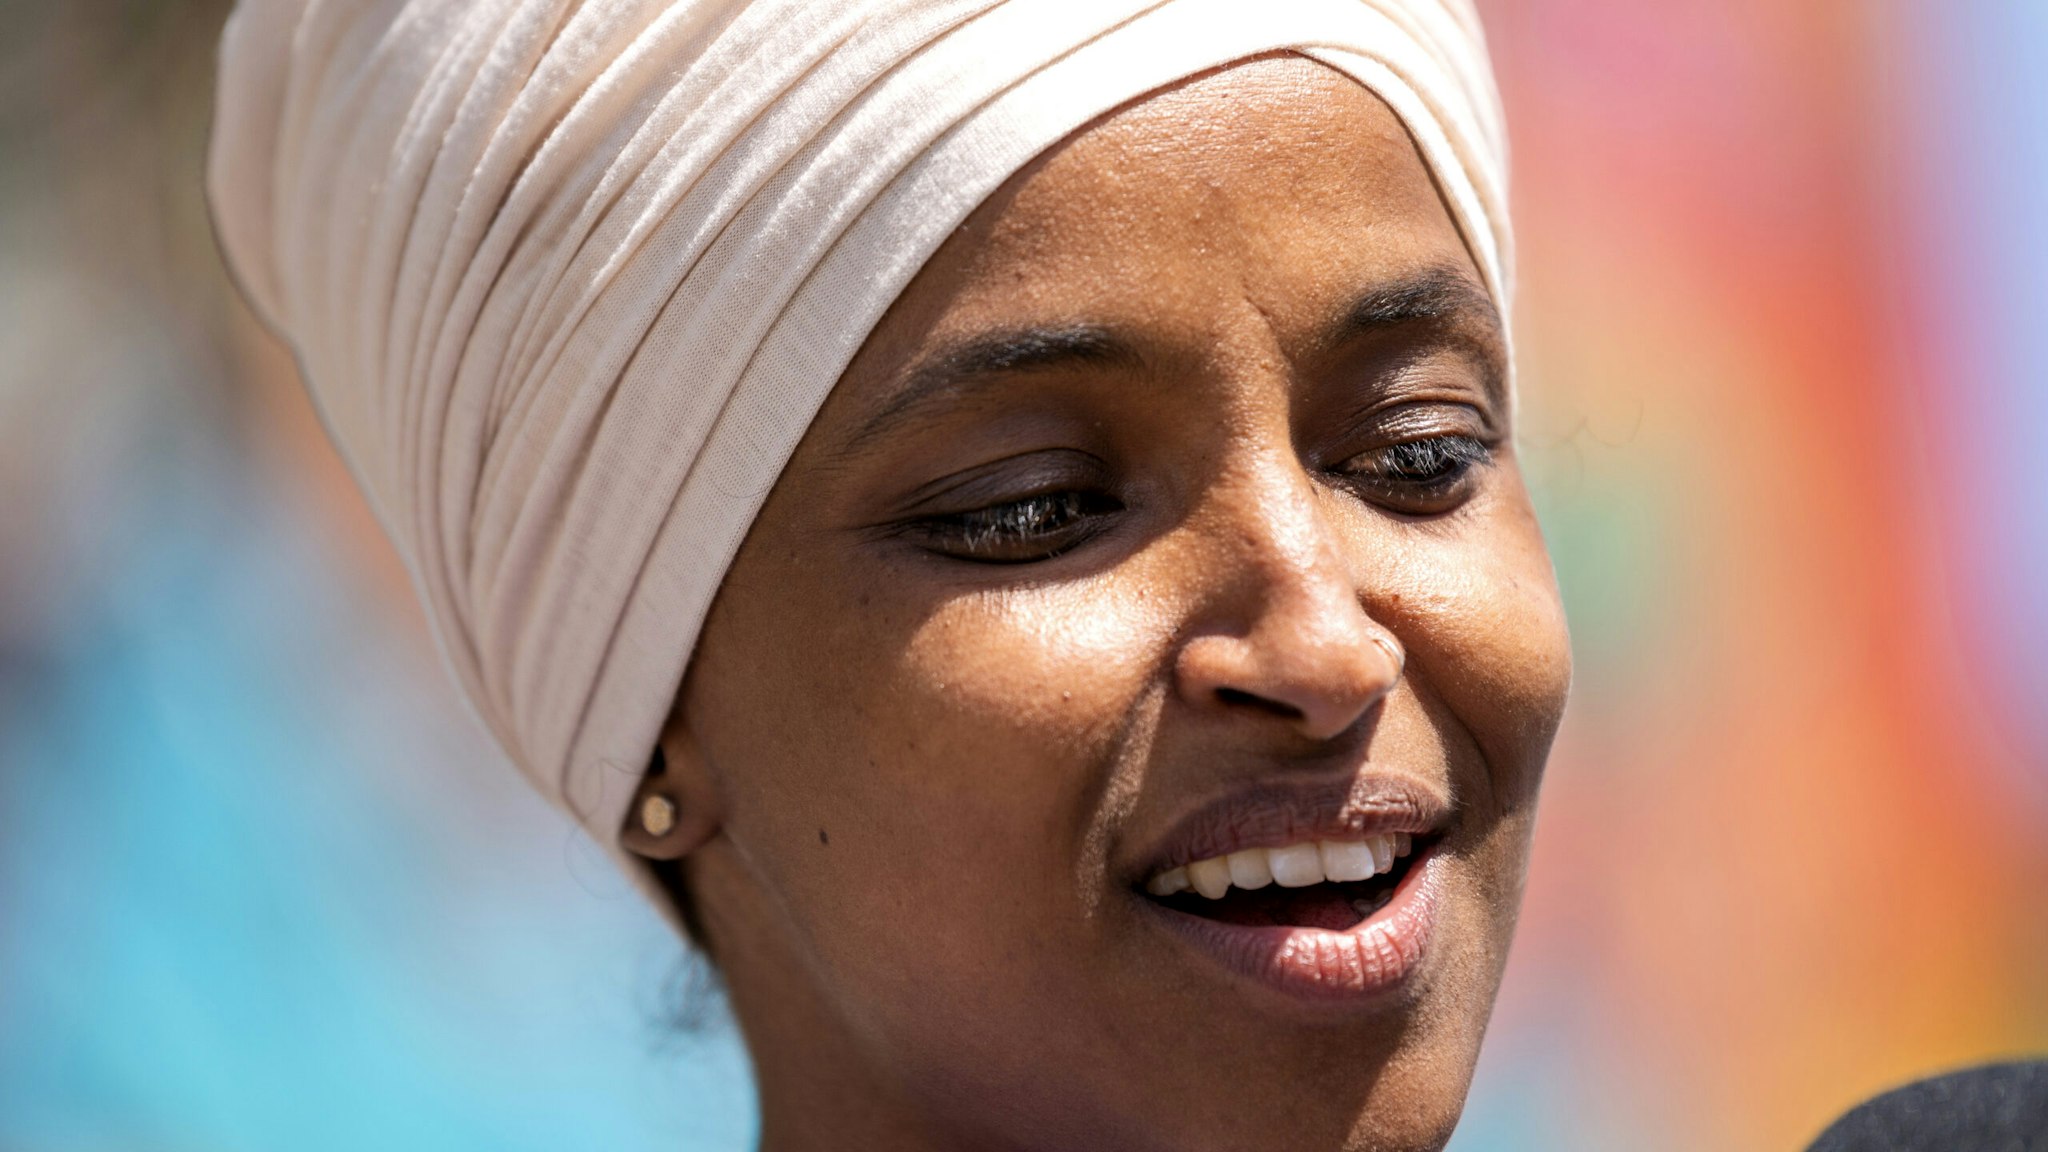 MINNEAPOLIS, MN - AUGUST 11: Rep. Ilhan Omar (D-MN) speaks with media gathered outside Mercado Central on August 11, 2020 in Minneapolis, Minnesota. Omar is hoping to retain her seat as the representative for Minnesota's 5th Congressional District in today's primary election.